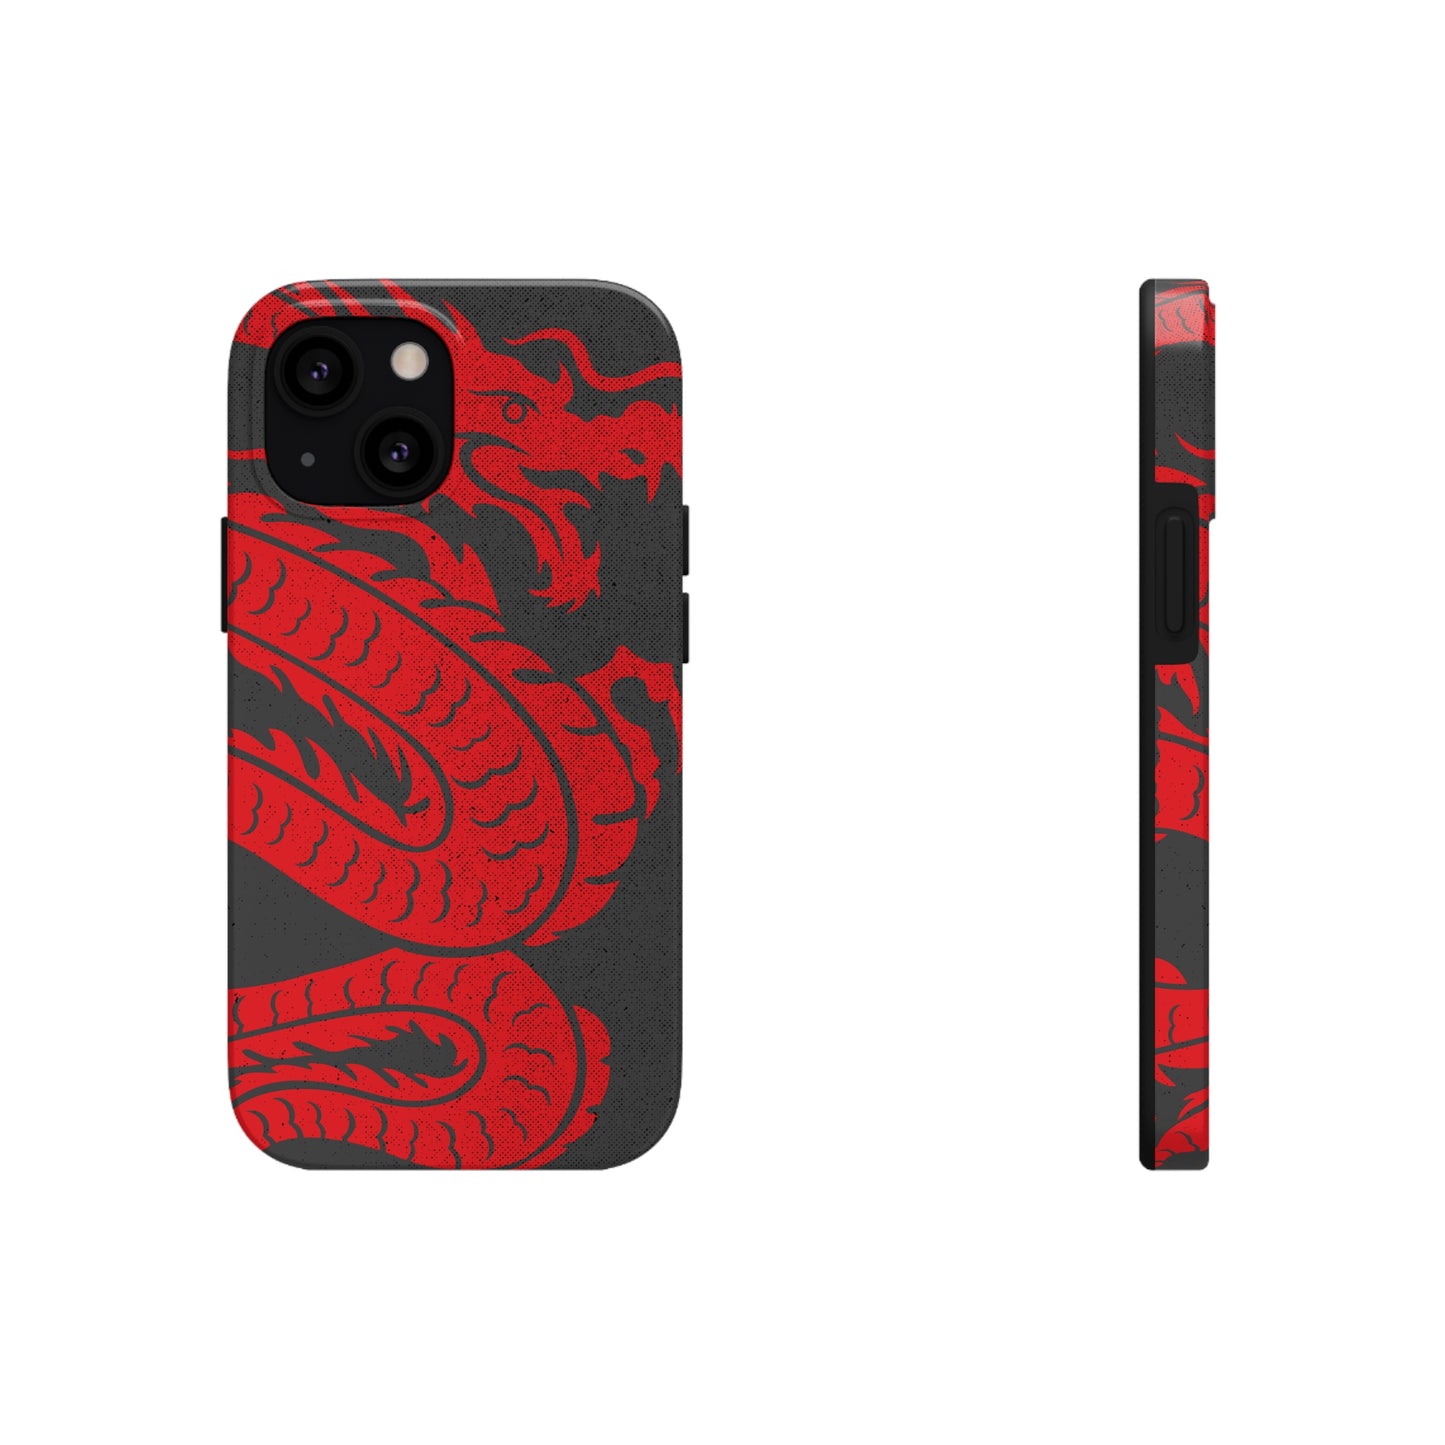 Red Dragon Tough iPhone Cases